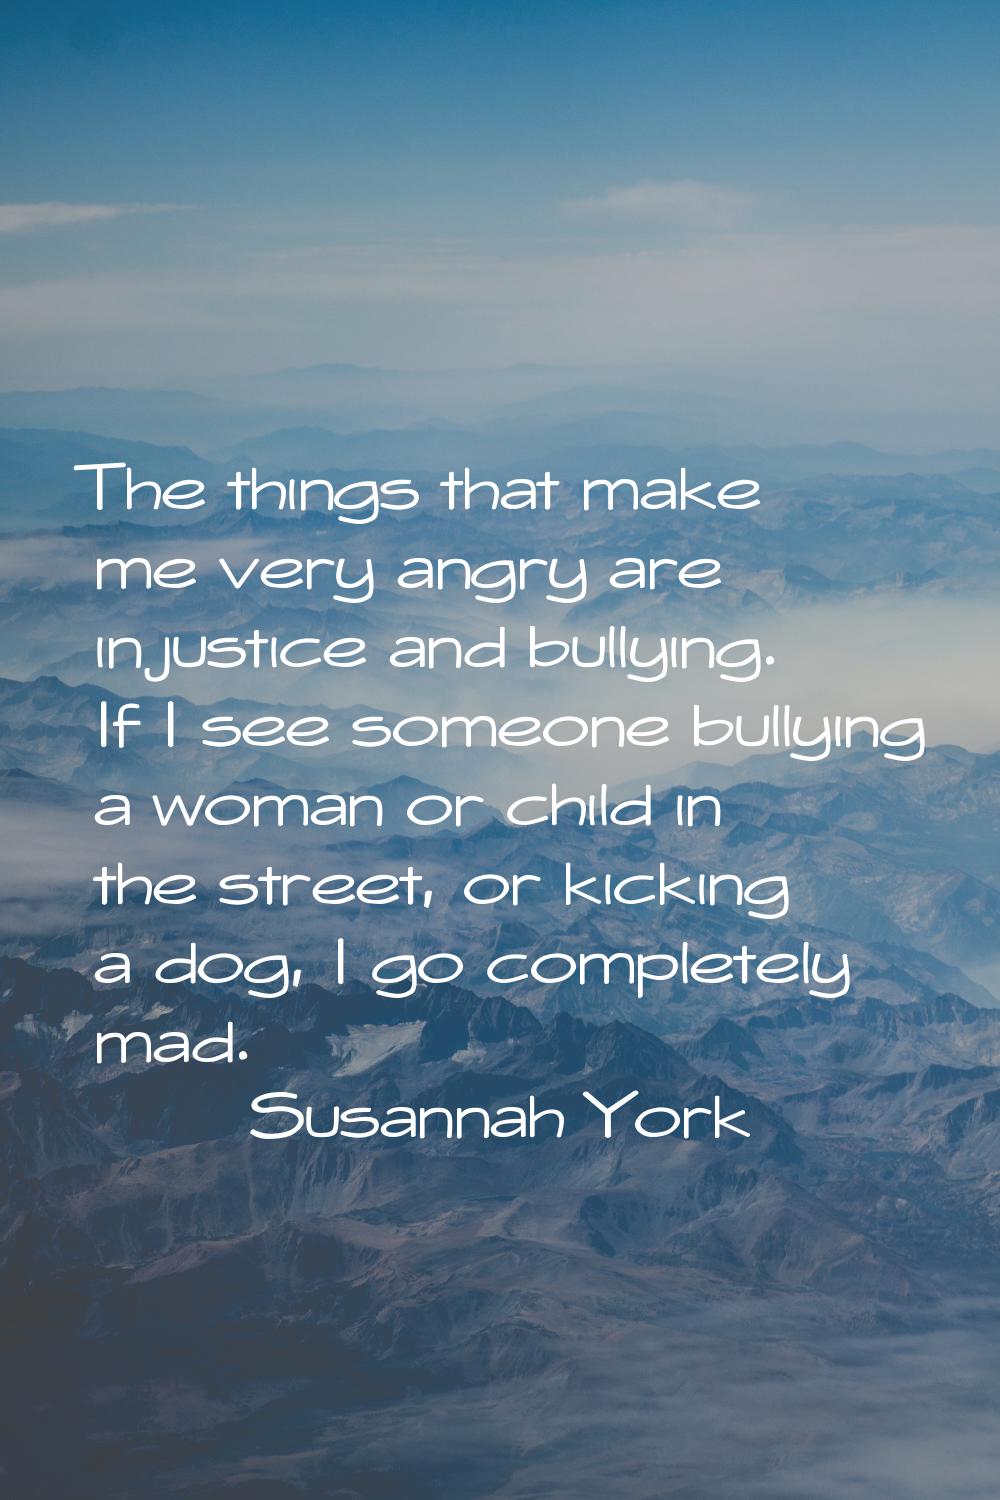 The things that make me very angry are injustice and bullying. If I see someone bullying a woman or